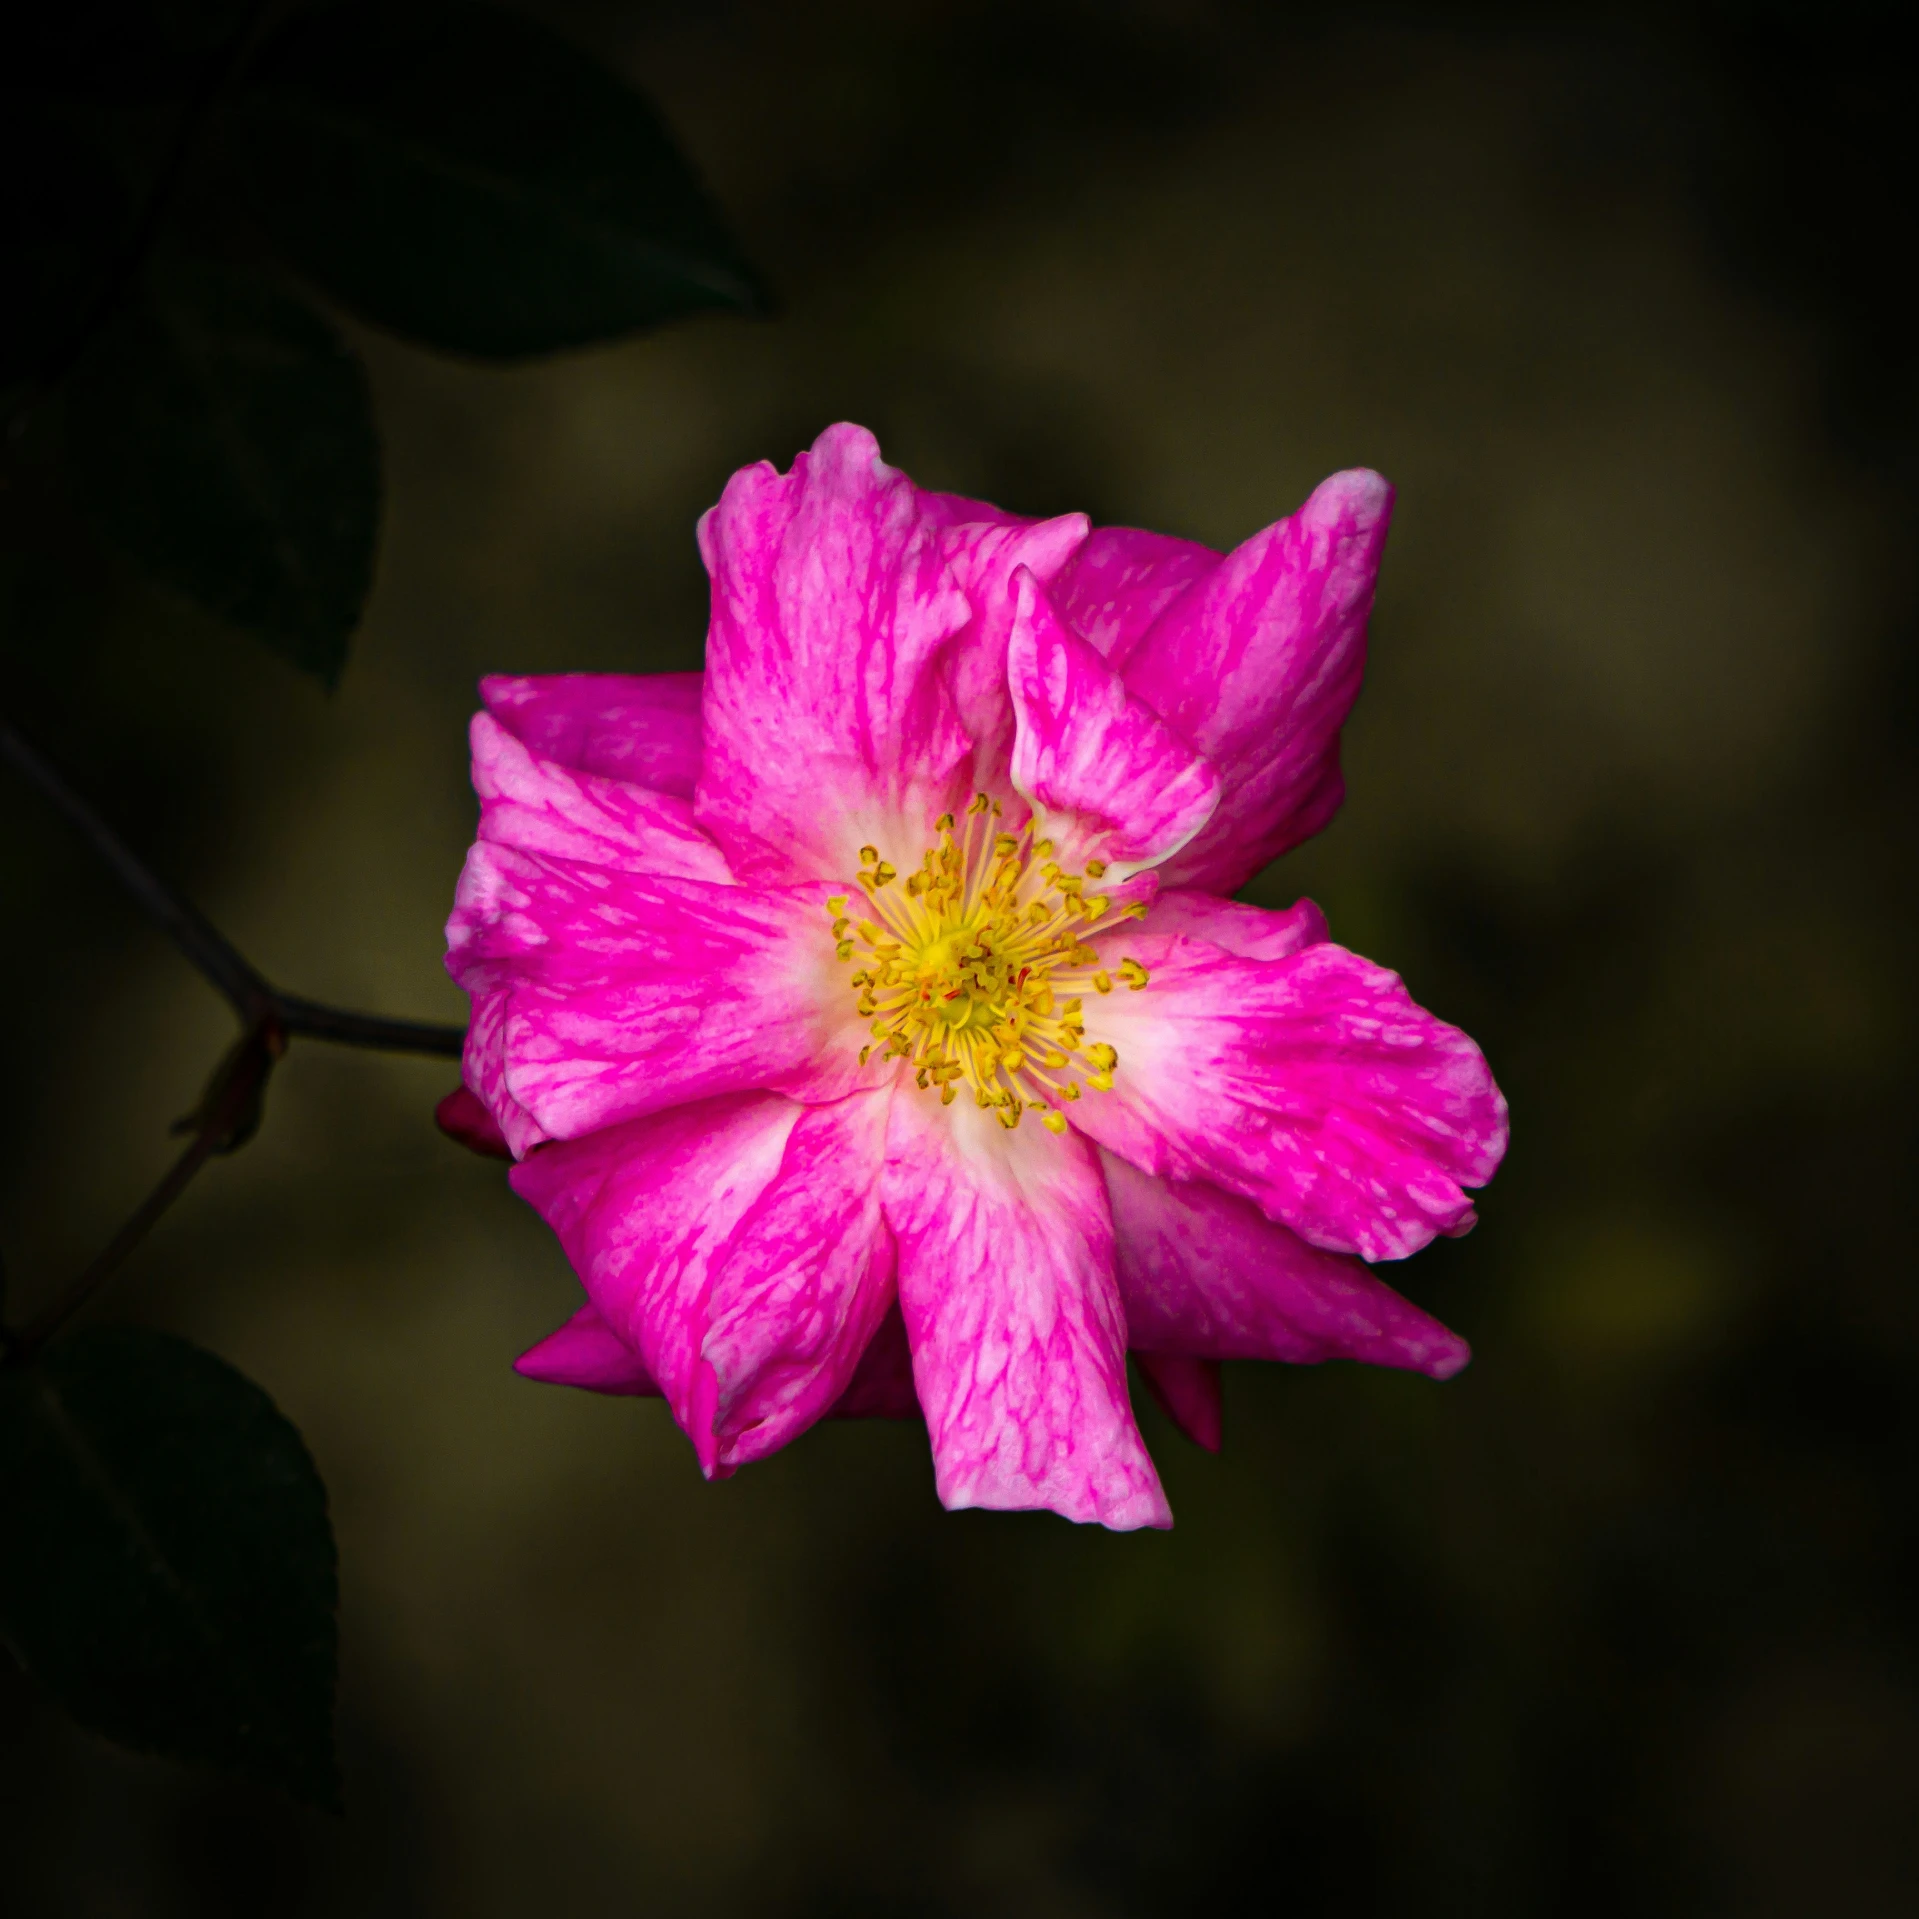 pink flower with bright yellow center blooming outside